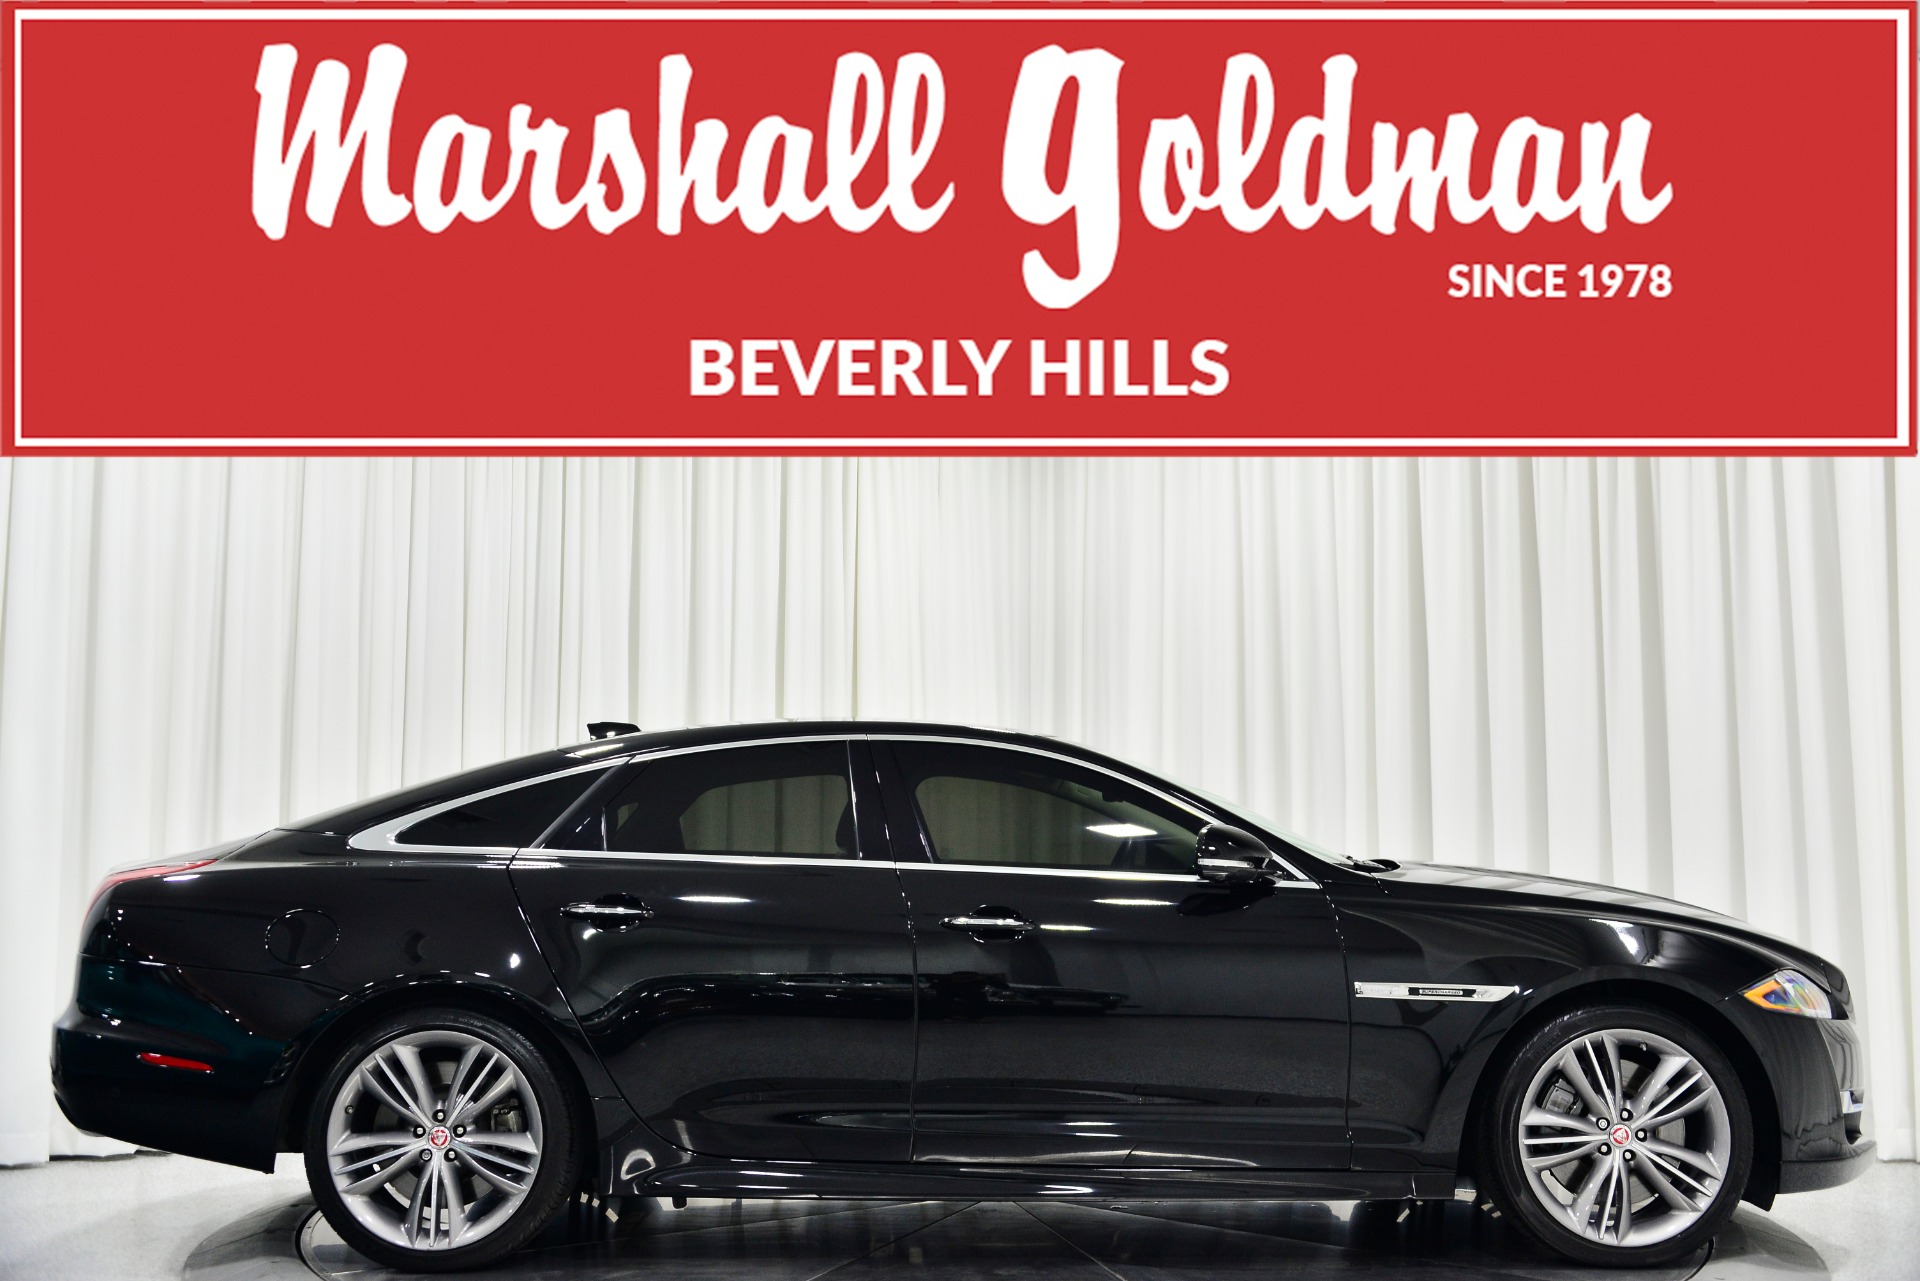 Used 2017 Jaguar XJ Supercharged For Sale (Sold) | Marshall Goldman Beverly  Hills Stock #BXJS